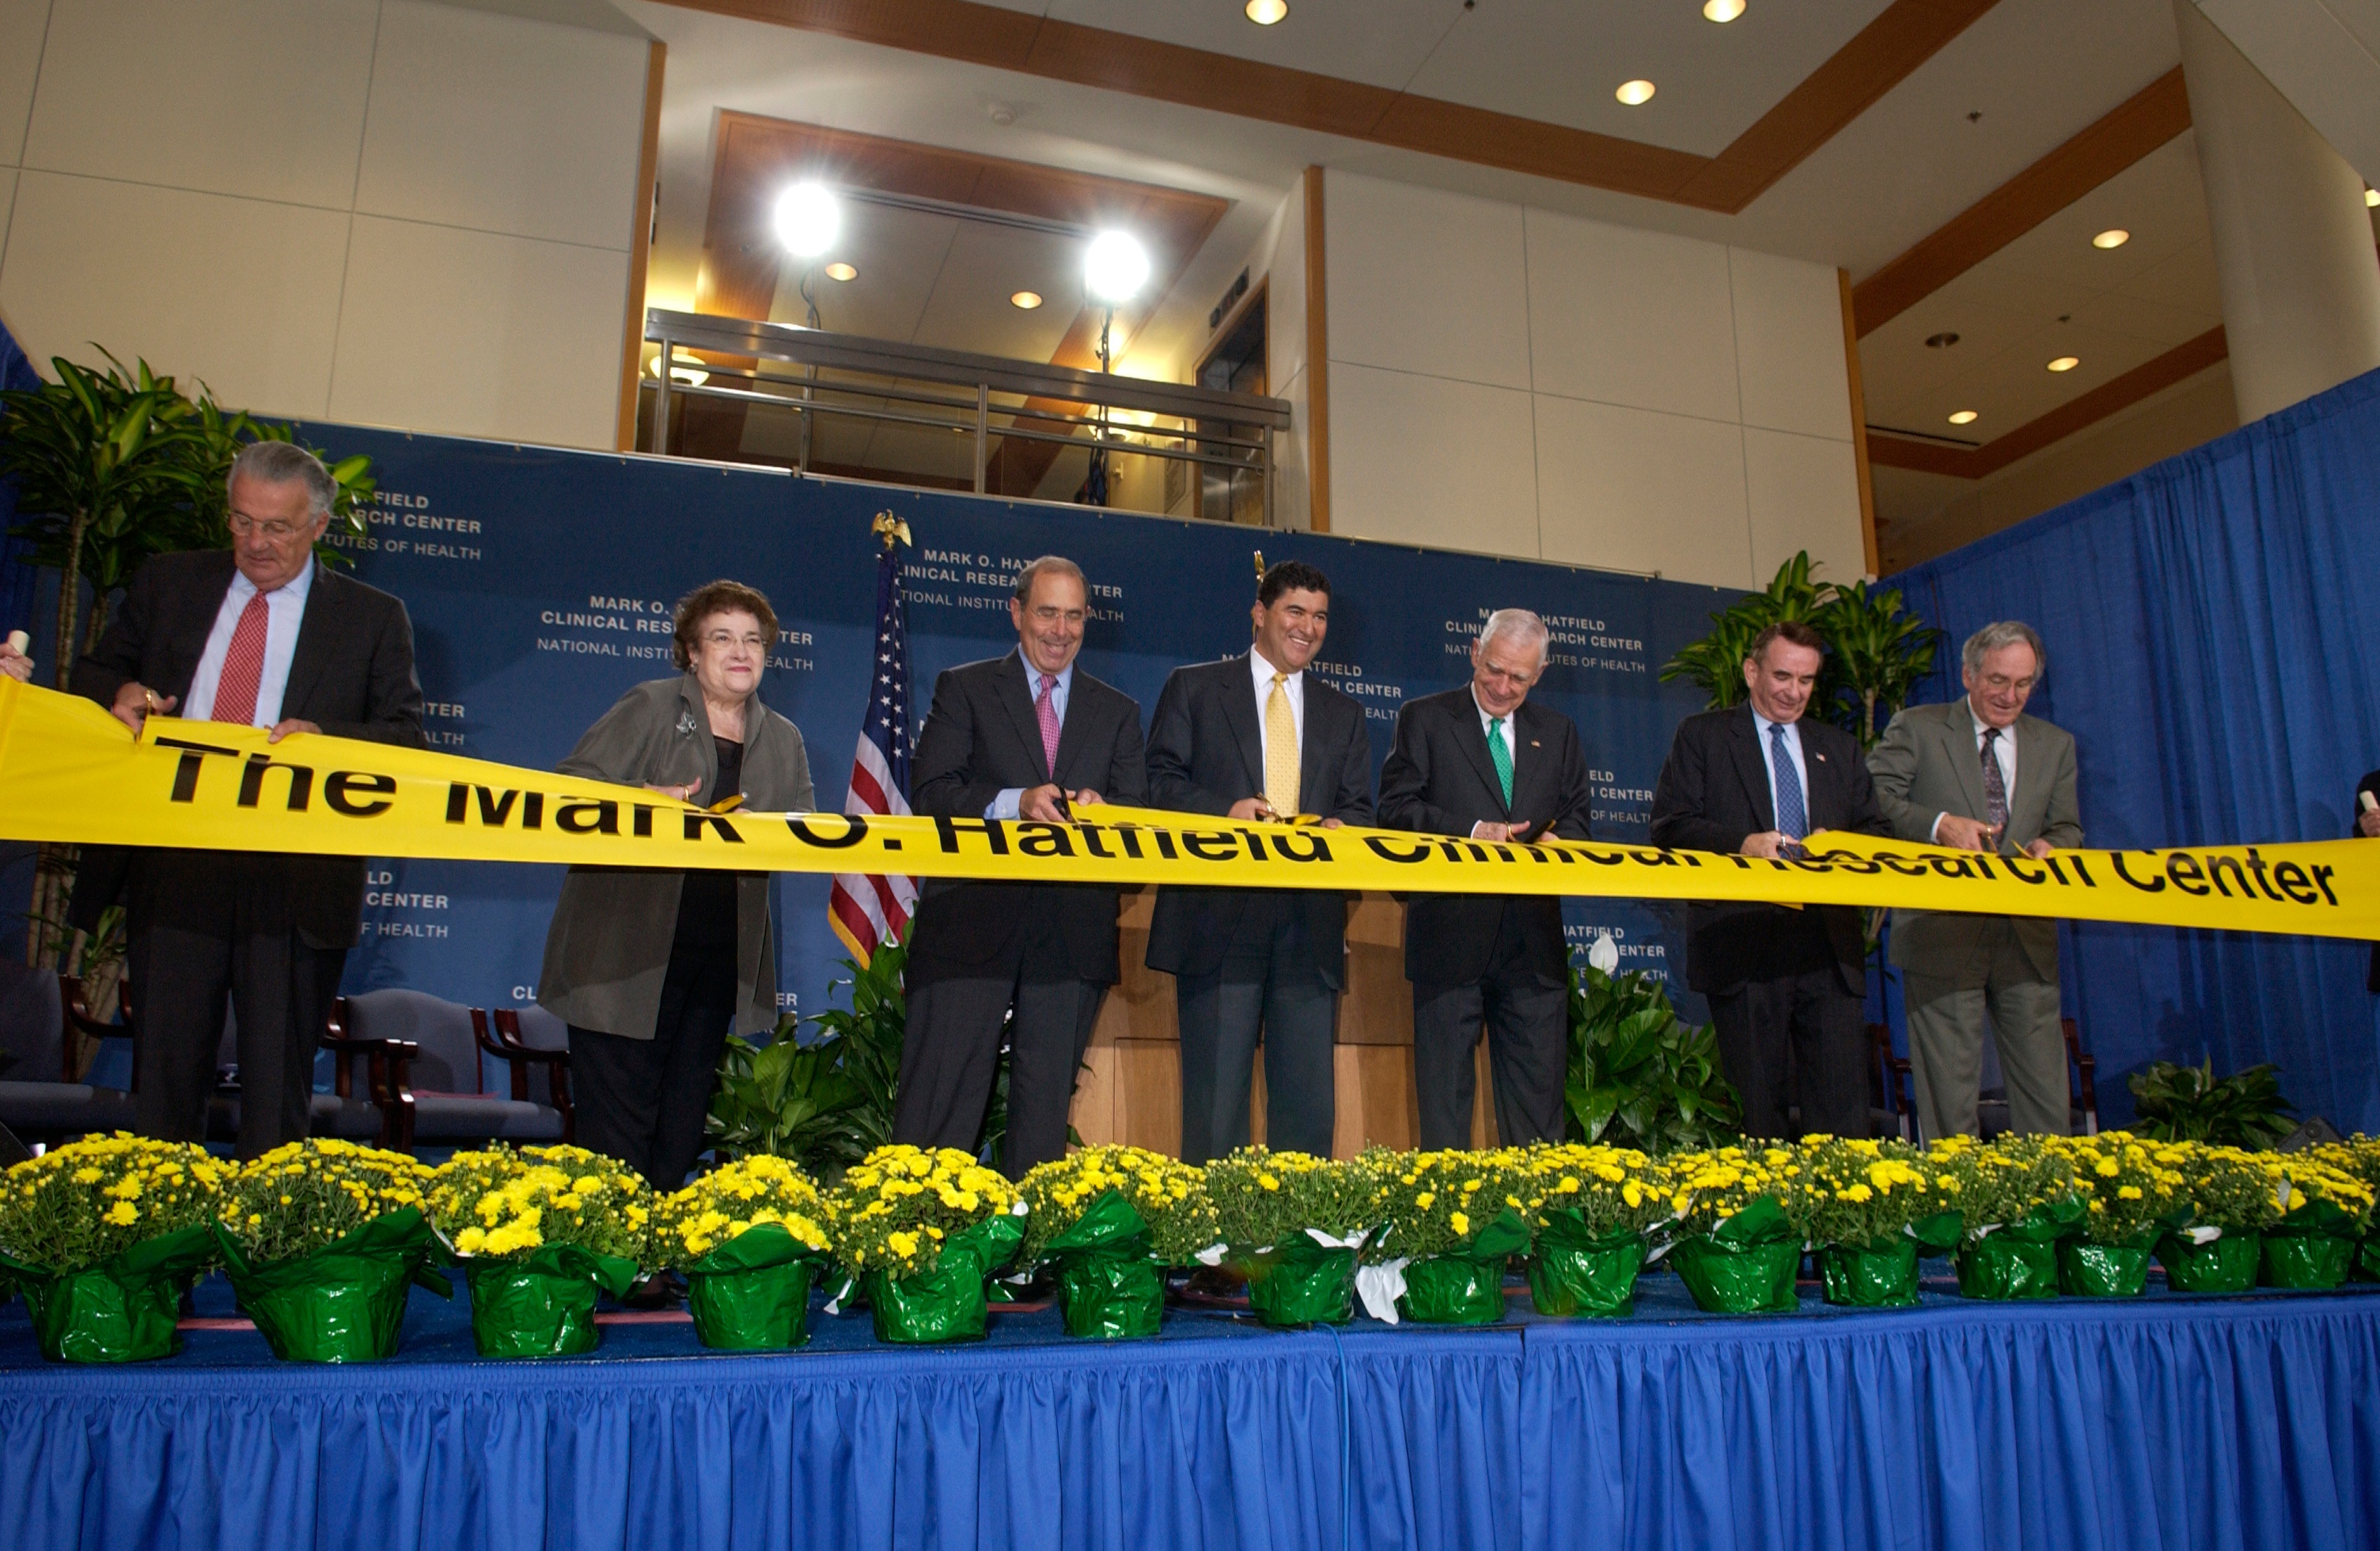 Photo 7. Ribbon cutting for the Mark O. Hatfield Clinical Research Center, 2004.